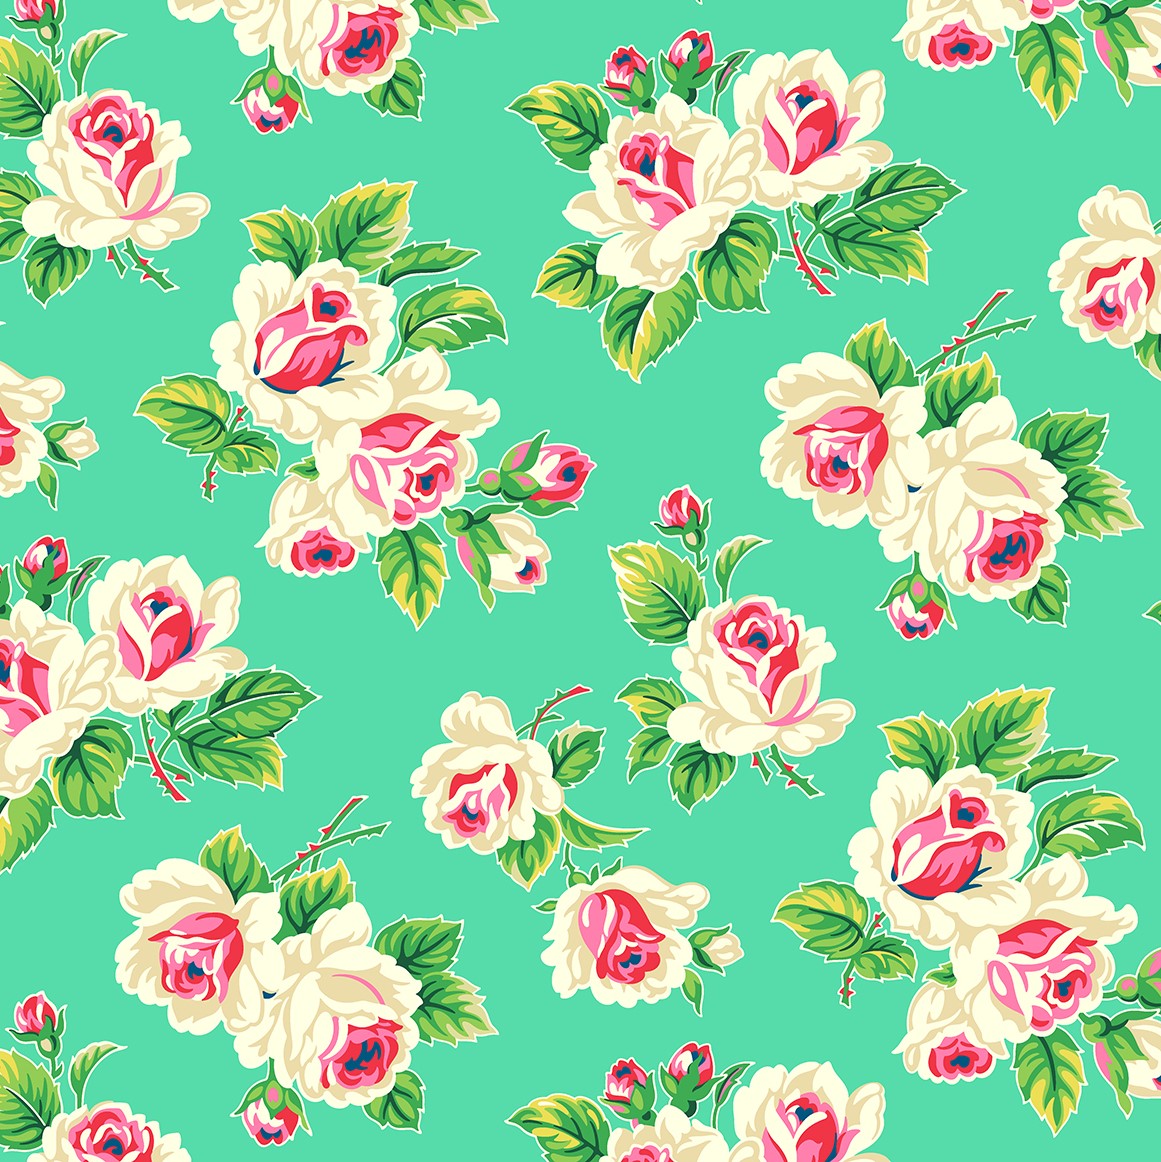 Quilting Fabric with Roses on Turquoise Green from True Kisses by Heather Bailey for Figo 90364 64